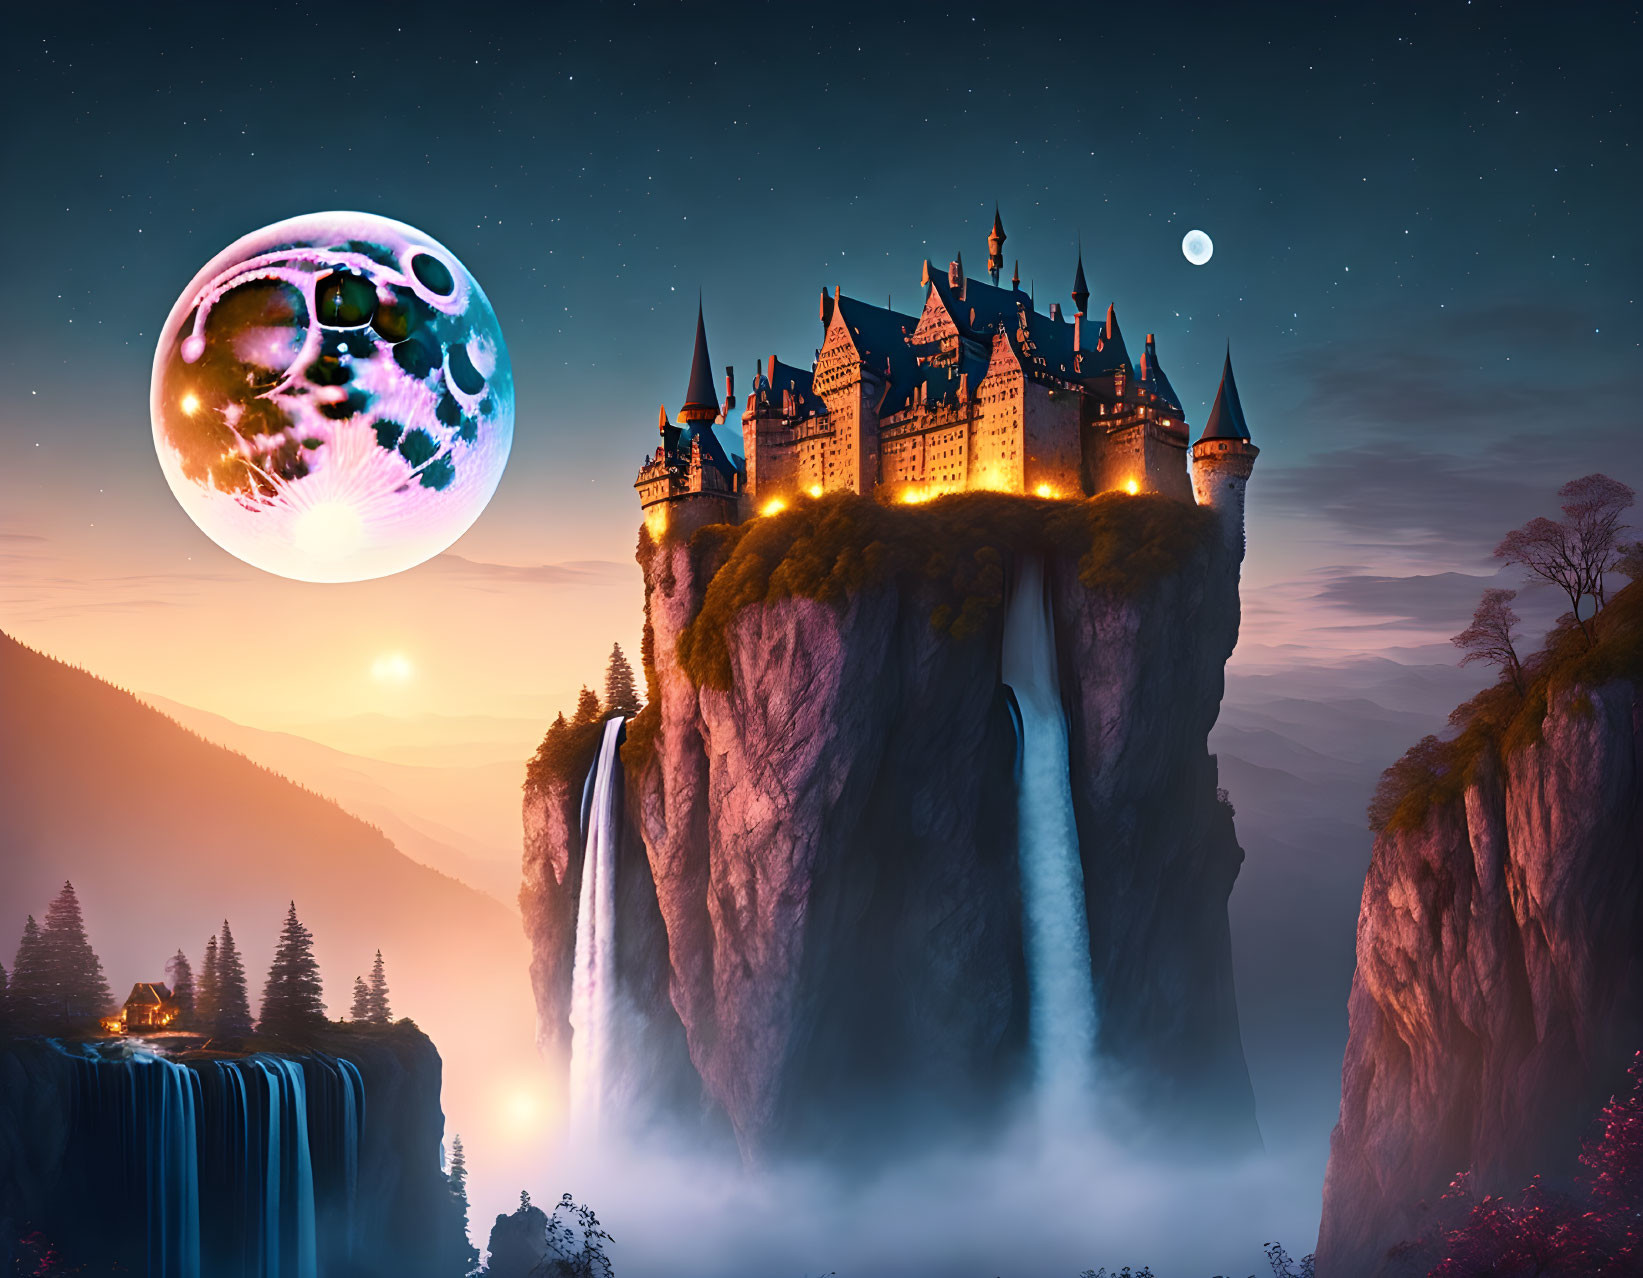 Fantastical castle on steep cliff with waterfalls under starry sky